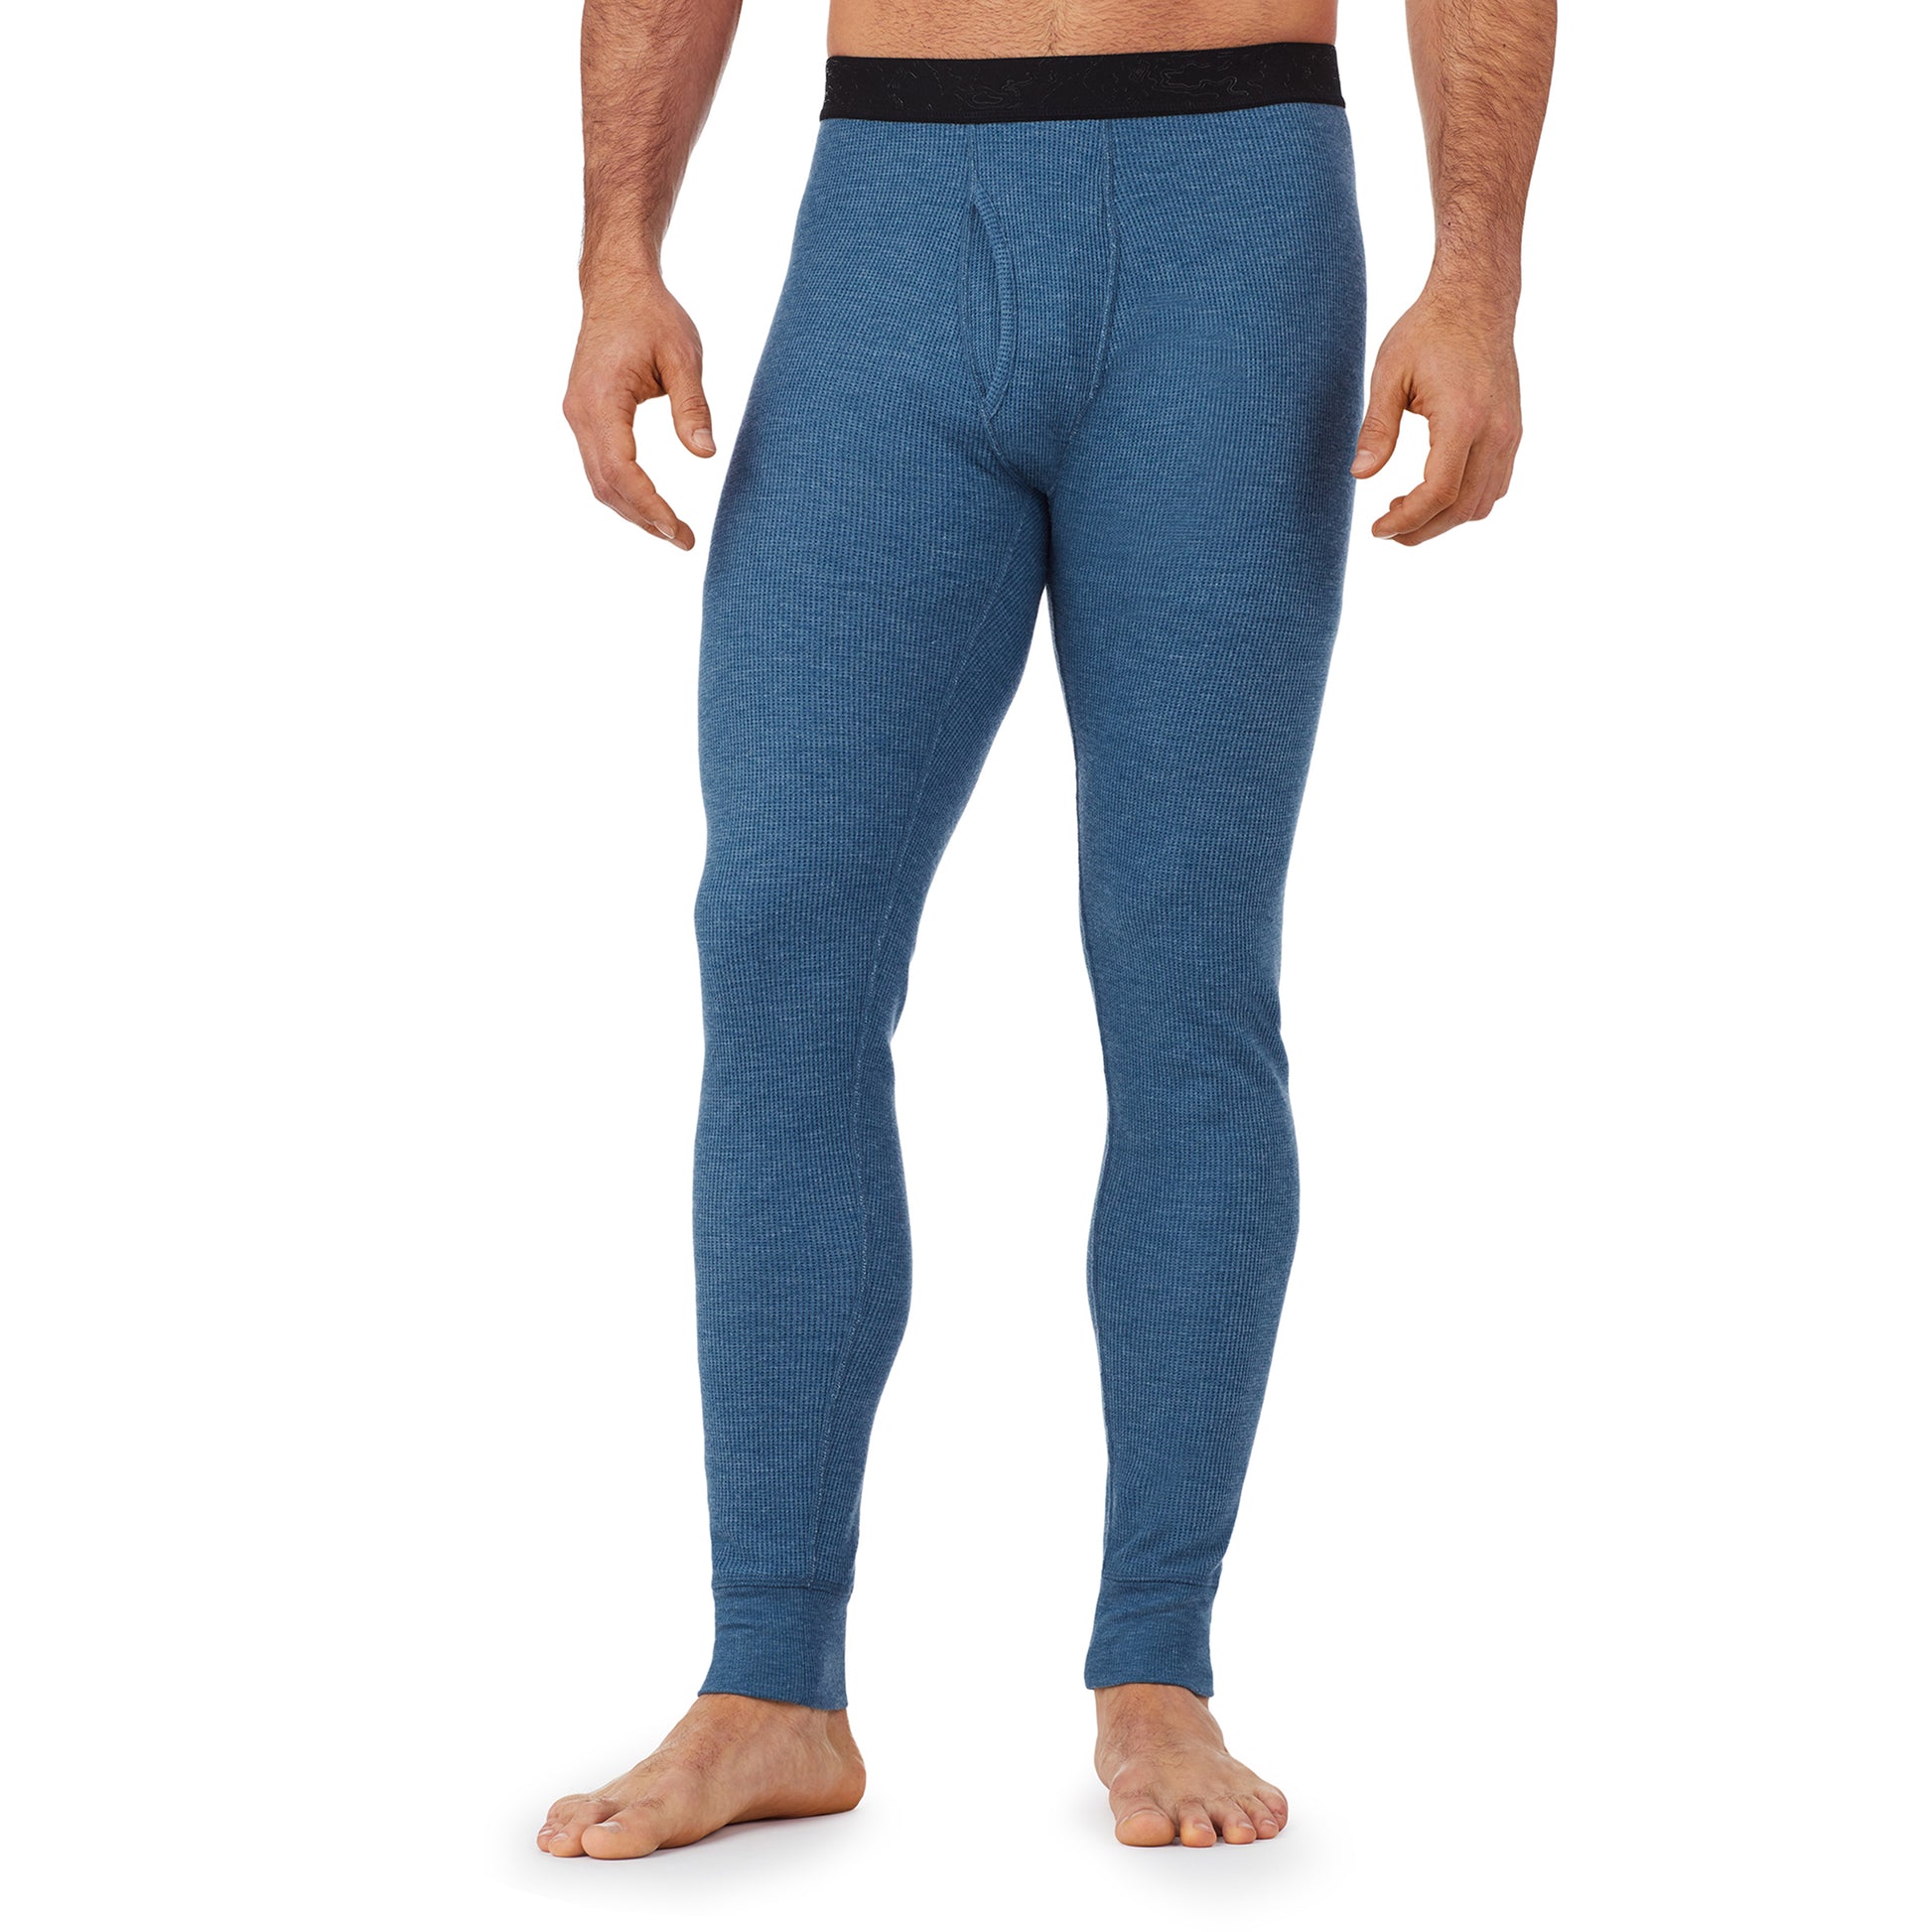 Blue Heather; Model is wearing size M. He is 6'1", Waist 31", Inseam 33". @A man wearing a blue heather waffle thermal pant.